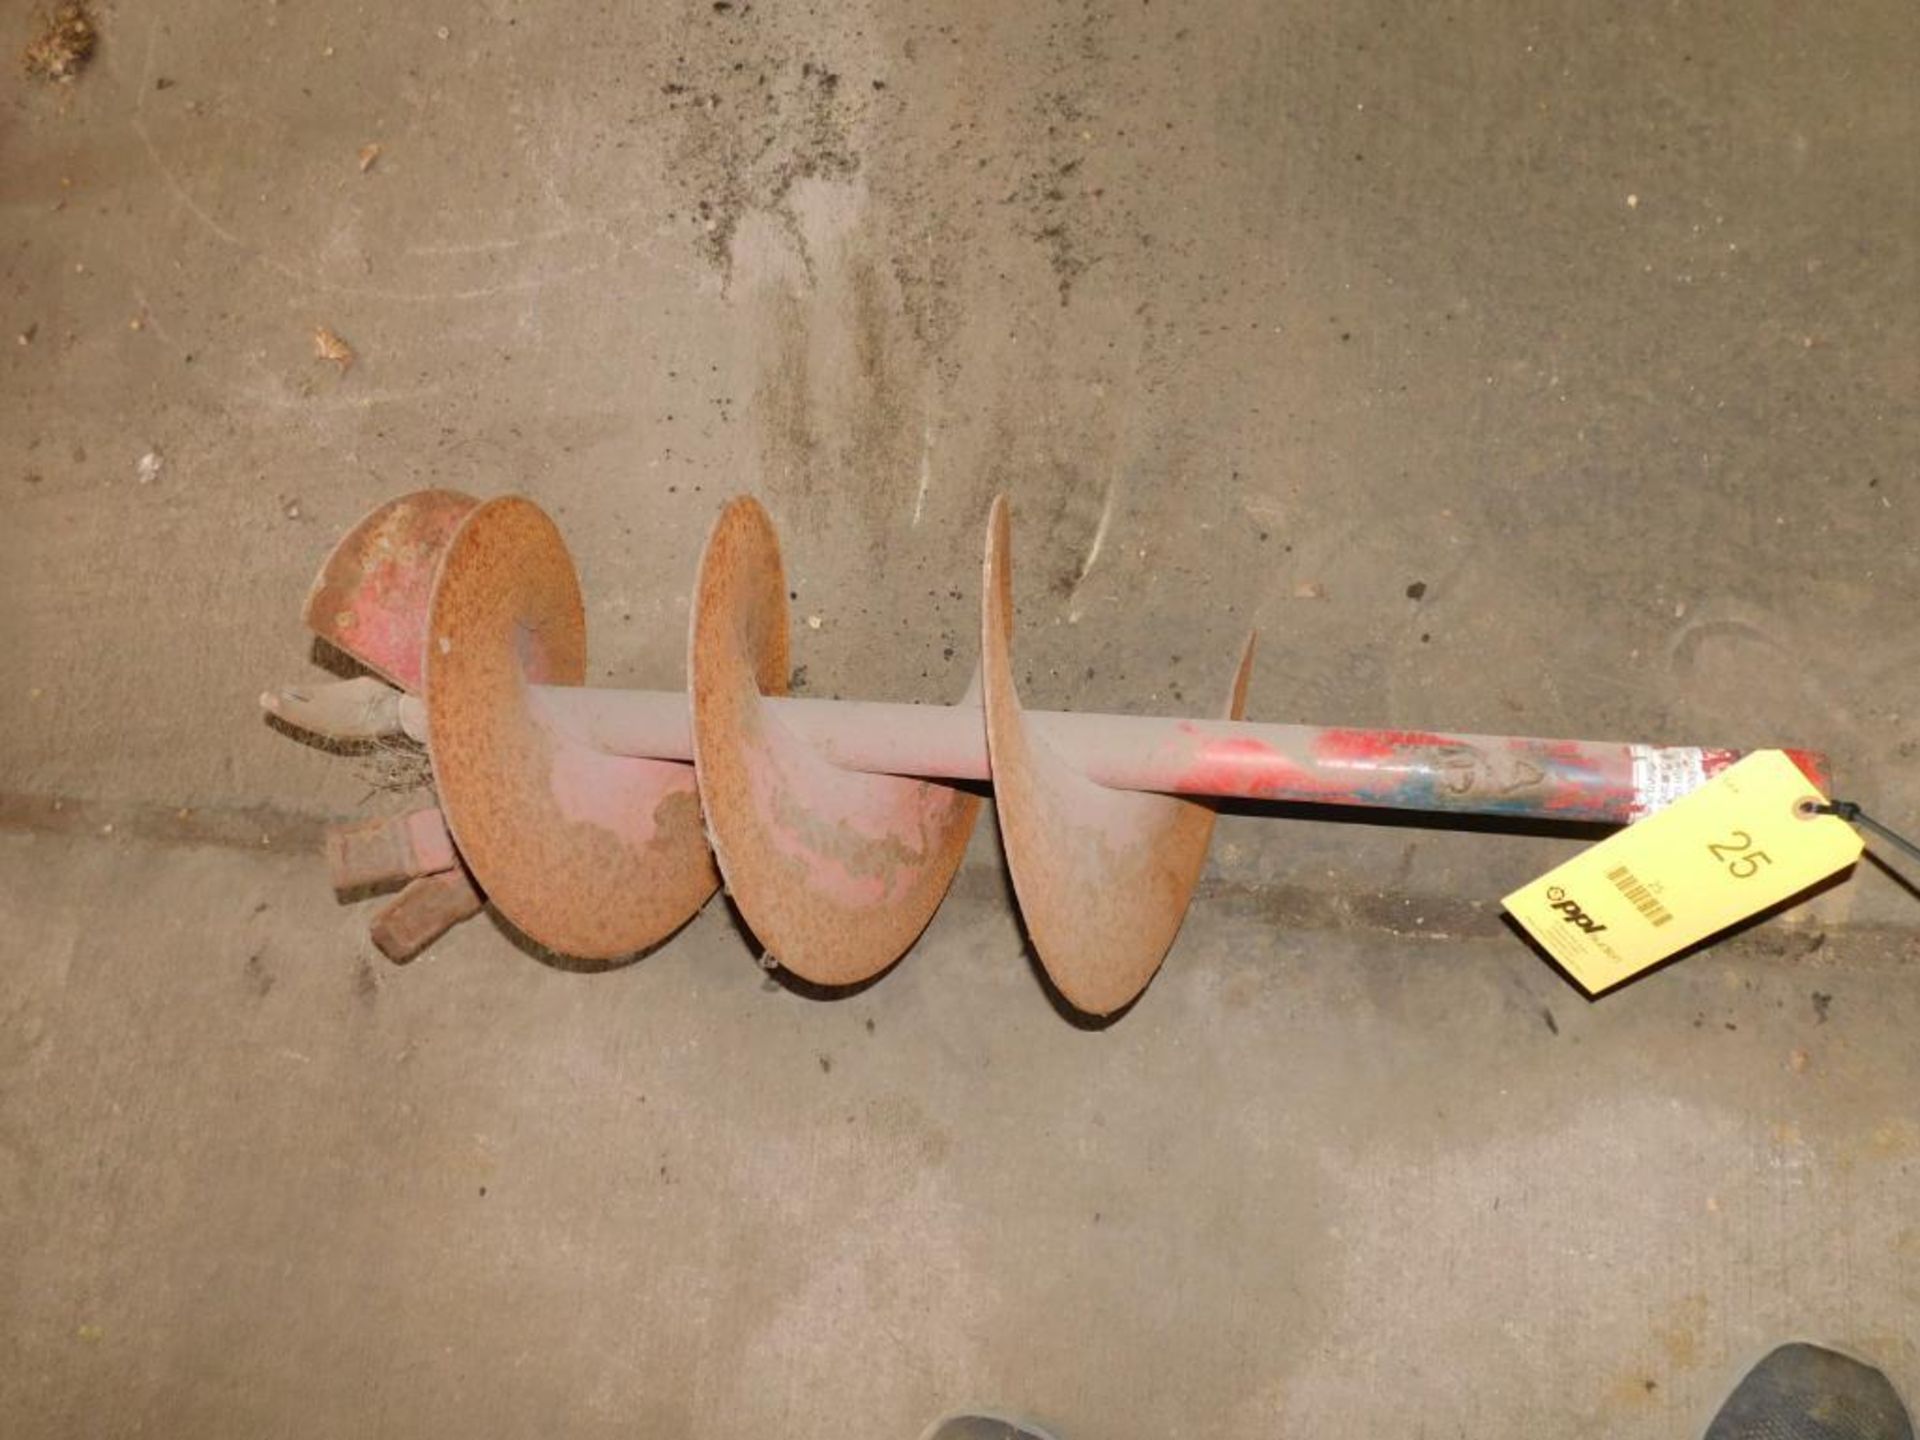 12" Auger Bit for Post Hole Digger, 36" Long - Image 2 of 3